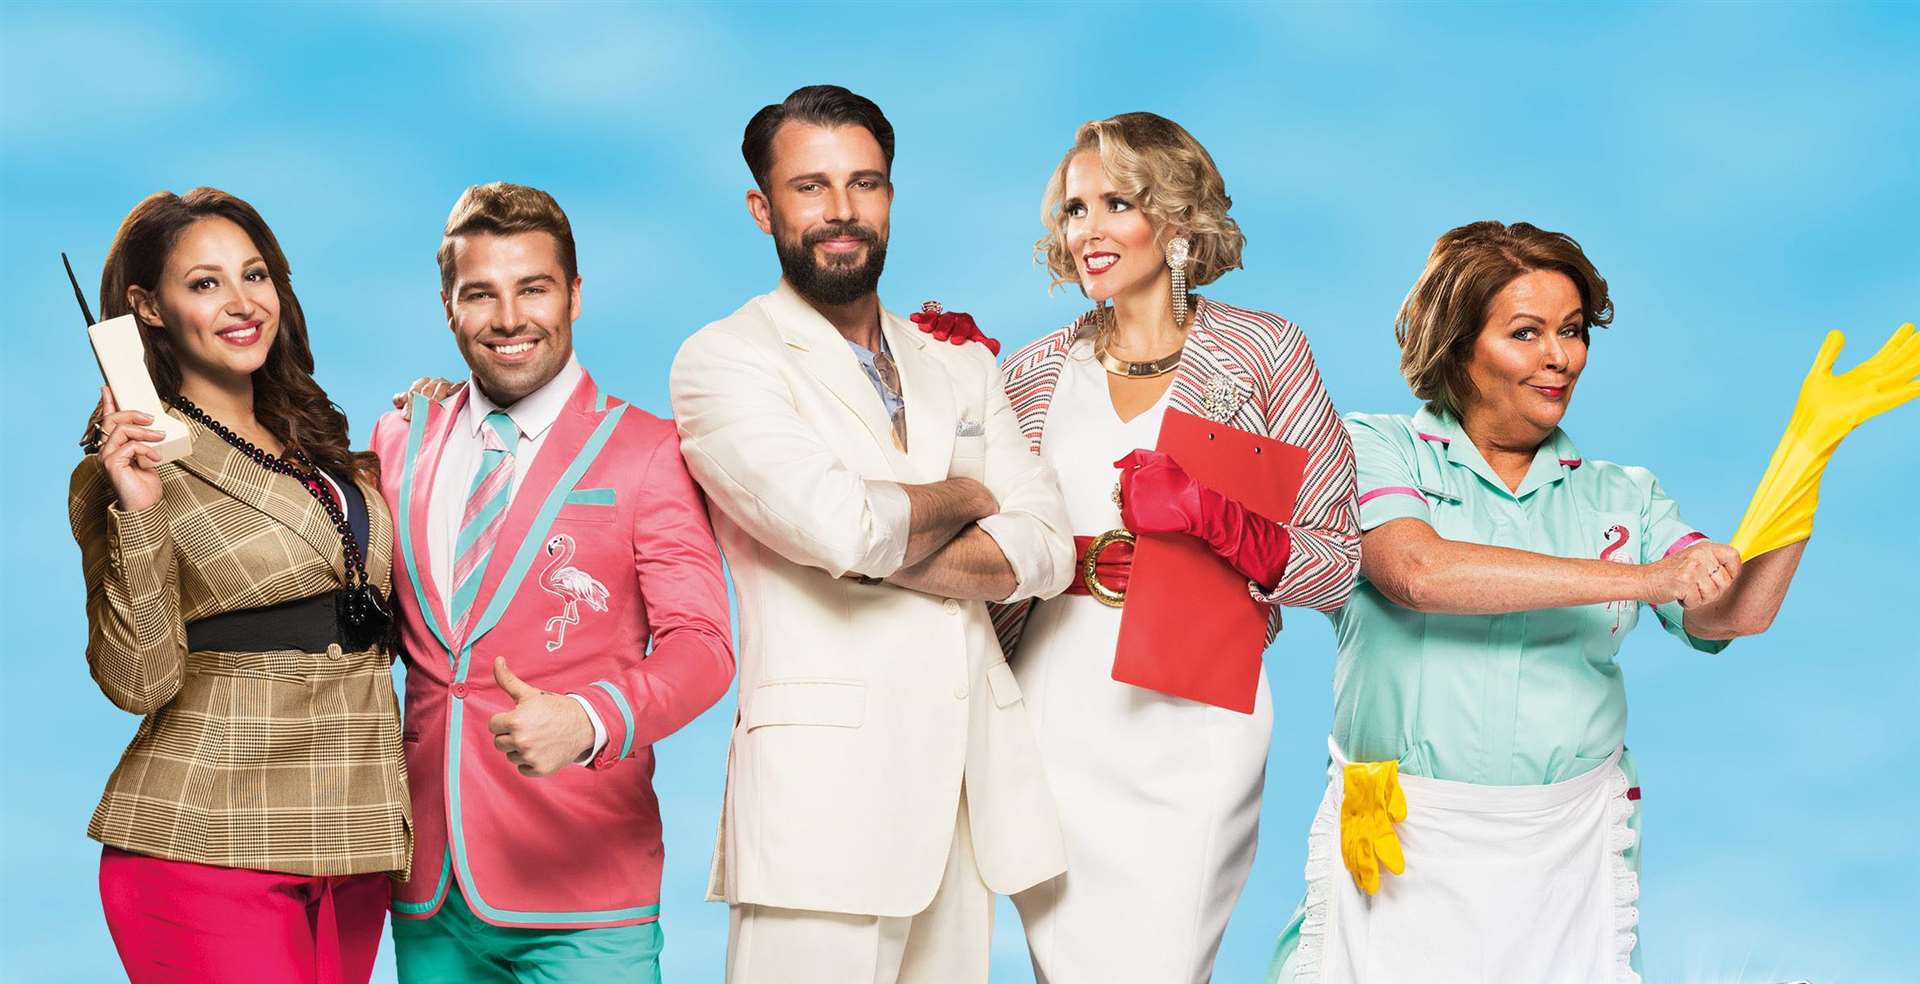 Club Tropicana the Musical will premiere in Bromley and also visit the Marlowe Theatre in Canterbury